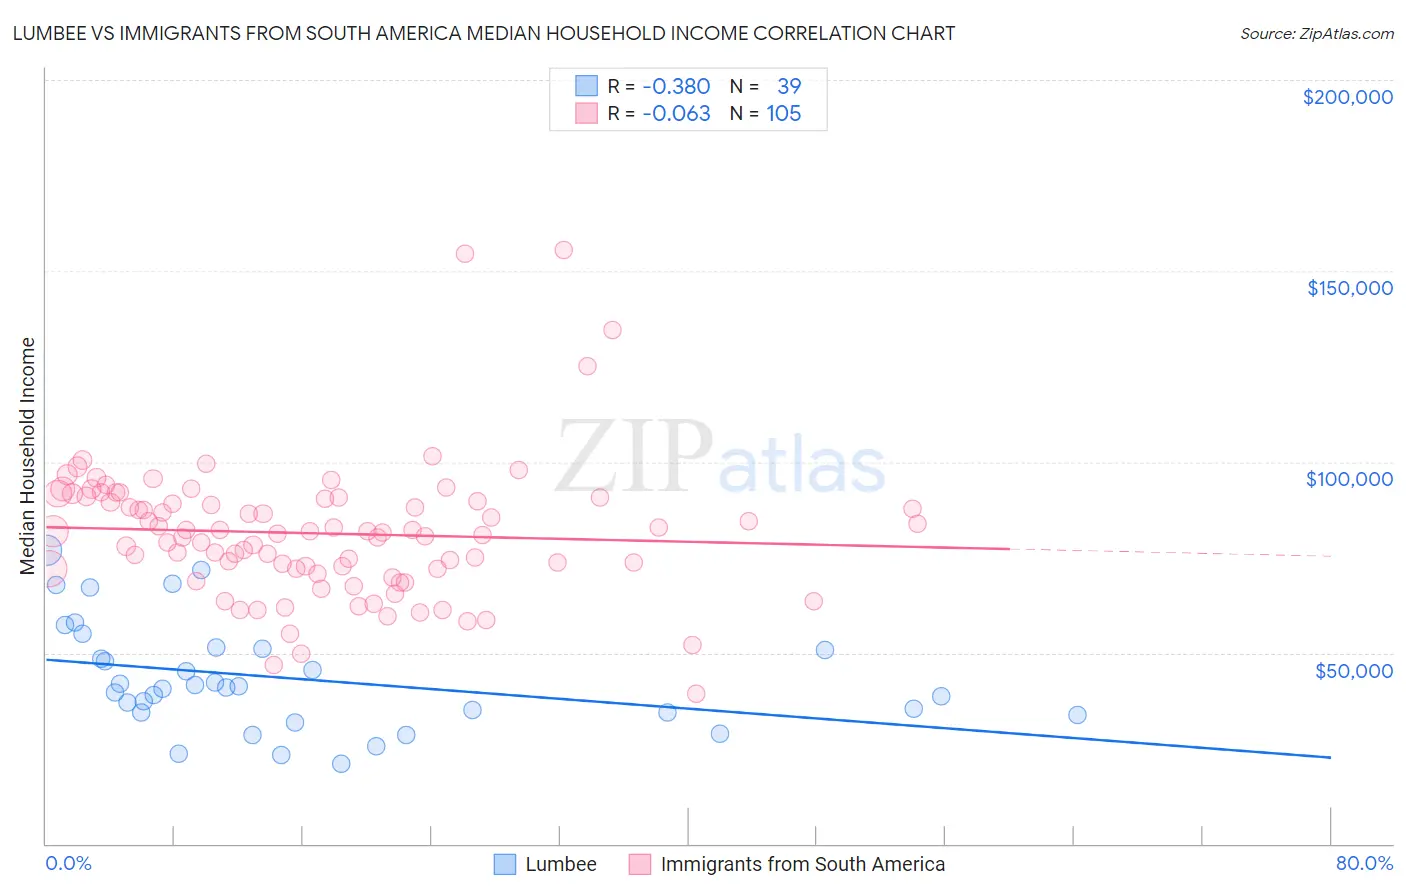 Lumbee vs Immigrants from South America Median Household Income